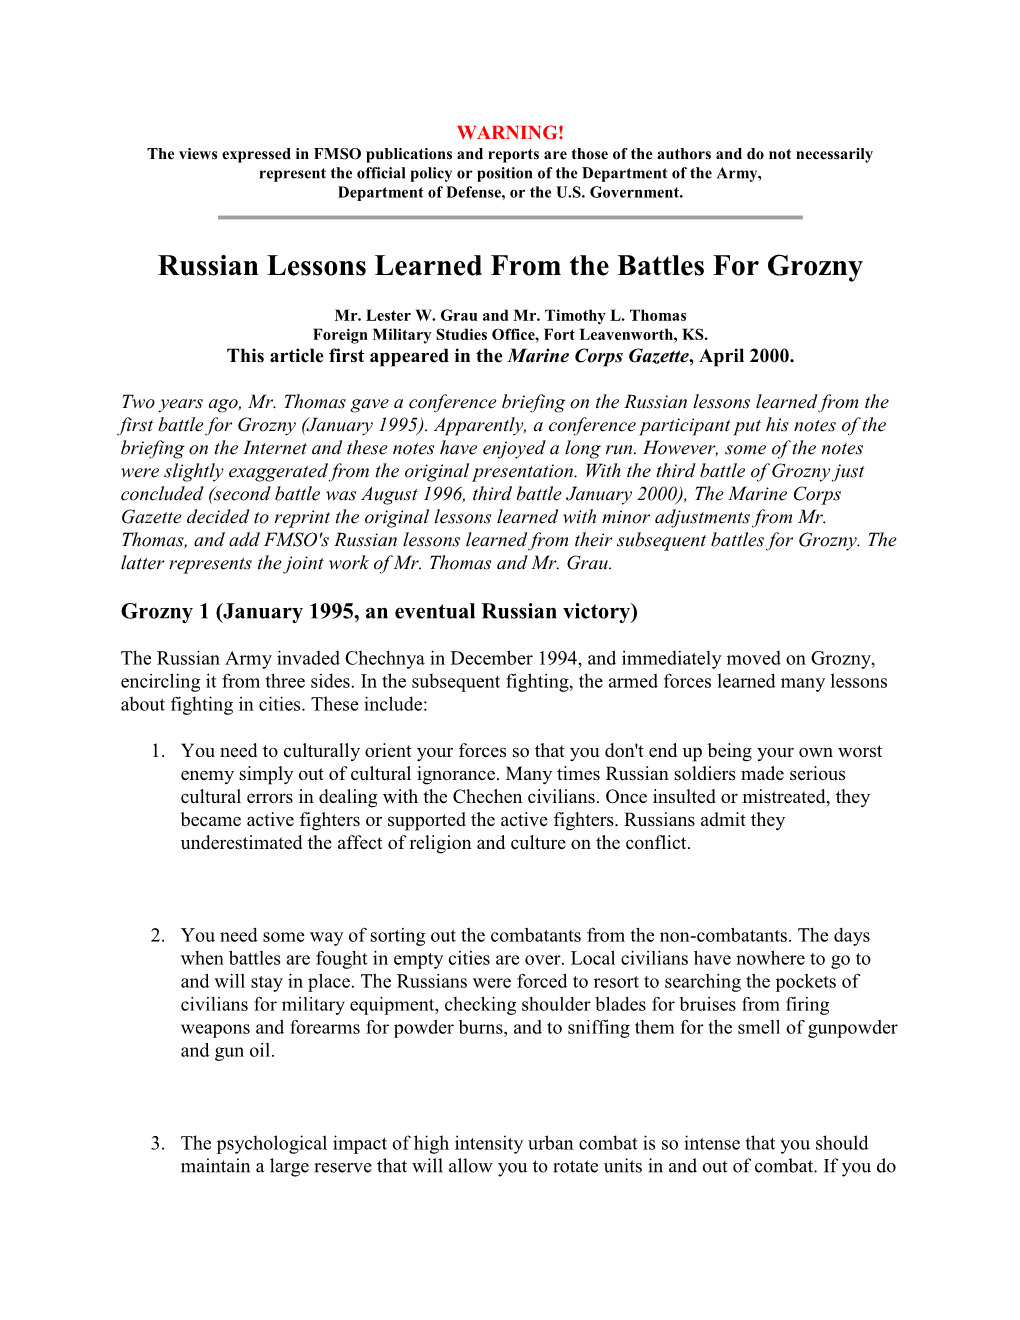 Russian Lessons Learned from the Battles for Grozny